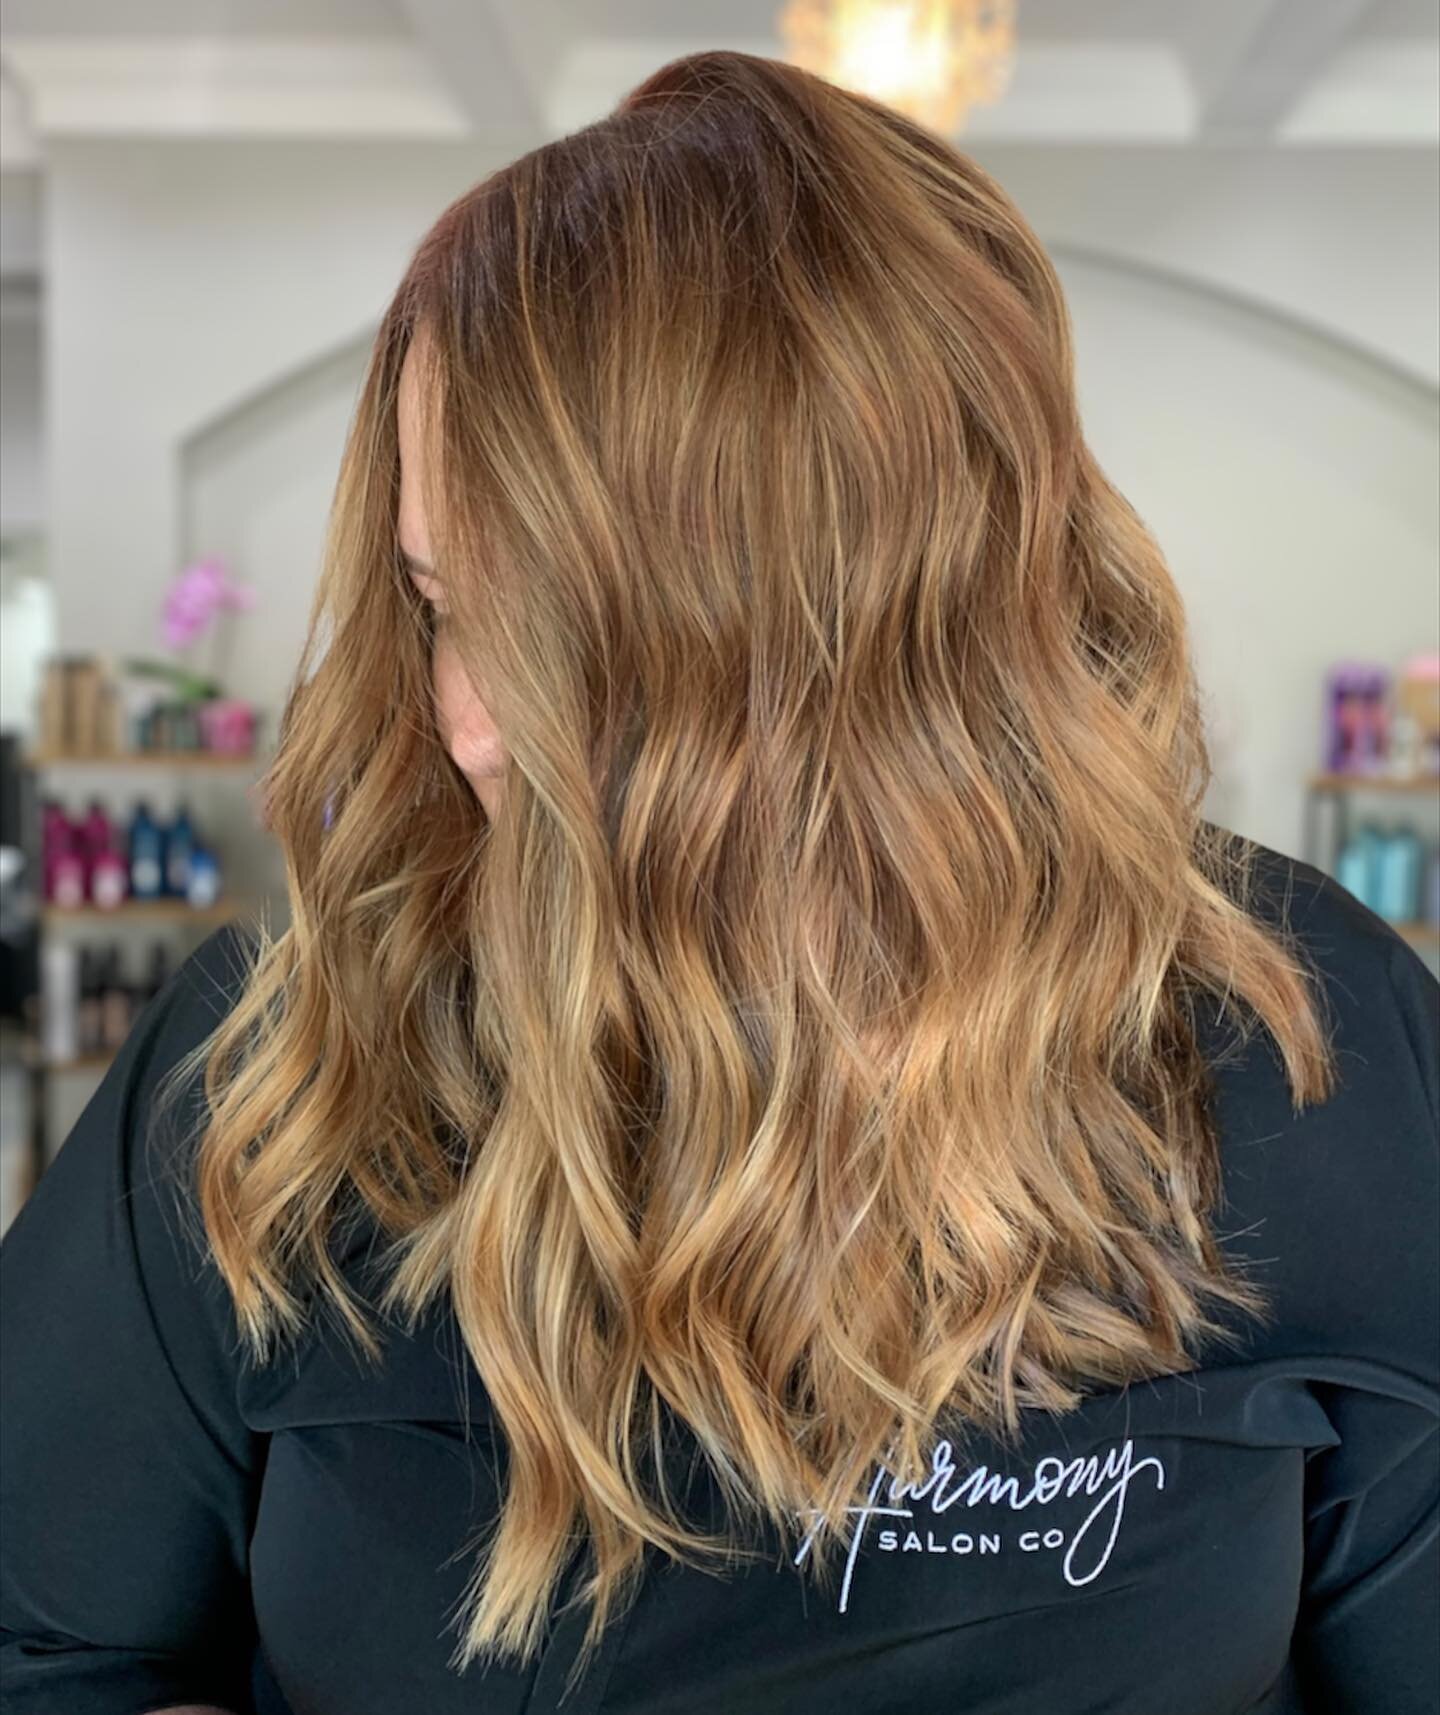 Bronde, but make it golden 🤩
By @katie.epperson.hair 
&bull;
&bull;
&bull;
#brondehair #caramelhair #goldenhair #warmhair #warmtonedhair #honeyhair #honeyhaircolor #caramelhaircolor #caramelbalayage #brondehaircolor #warmhaircolor #warmbalayage #tea